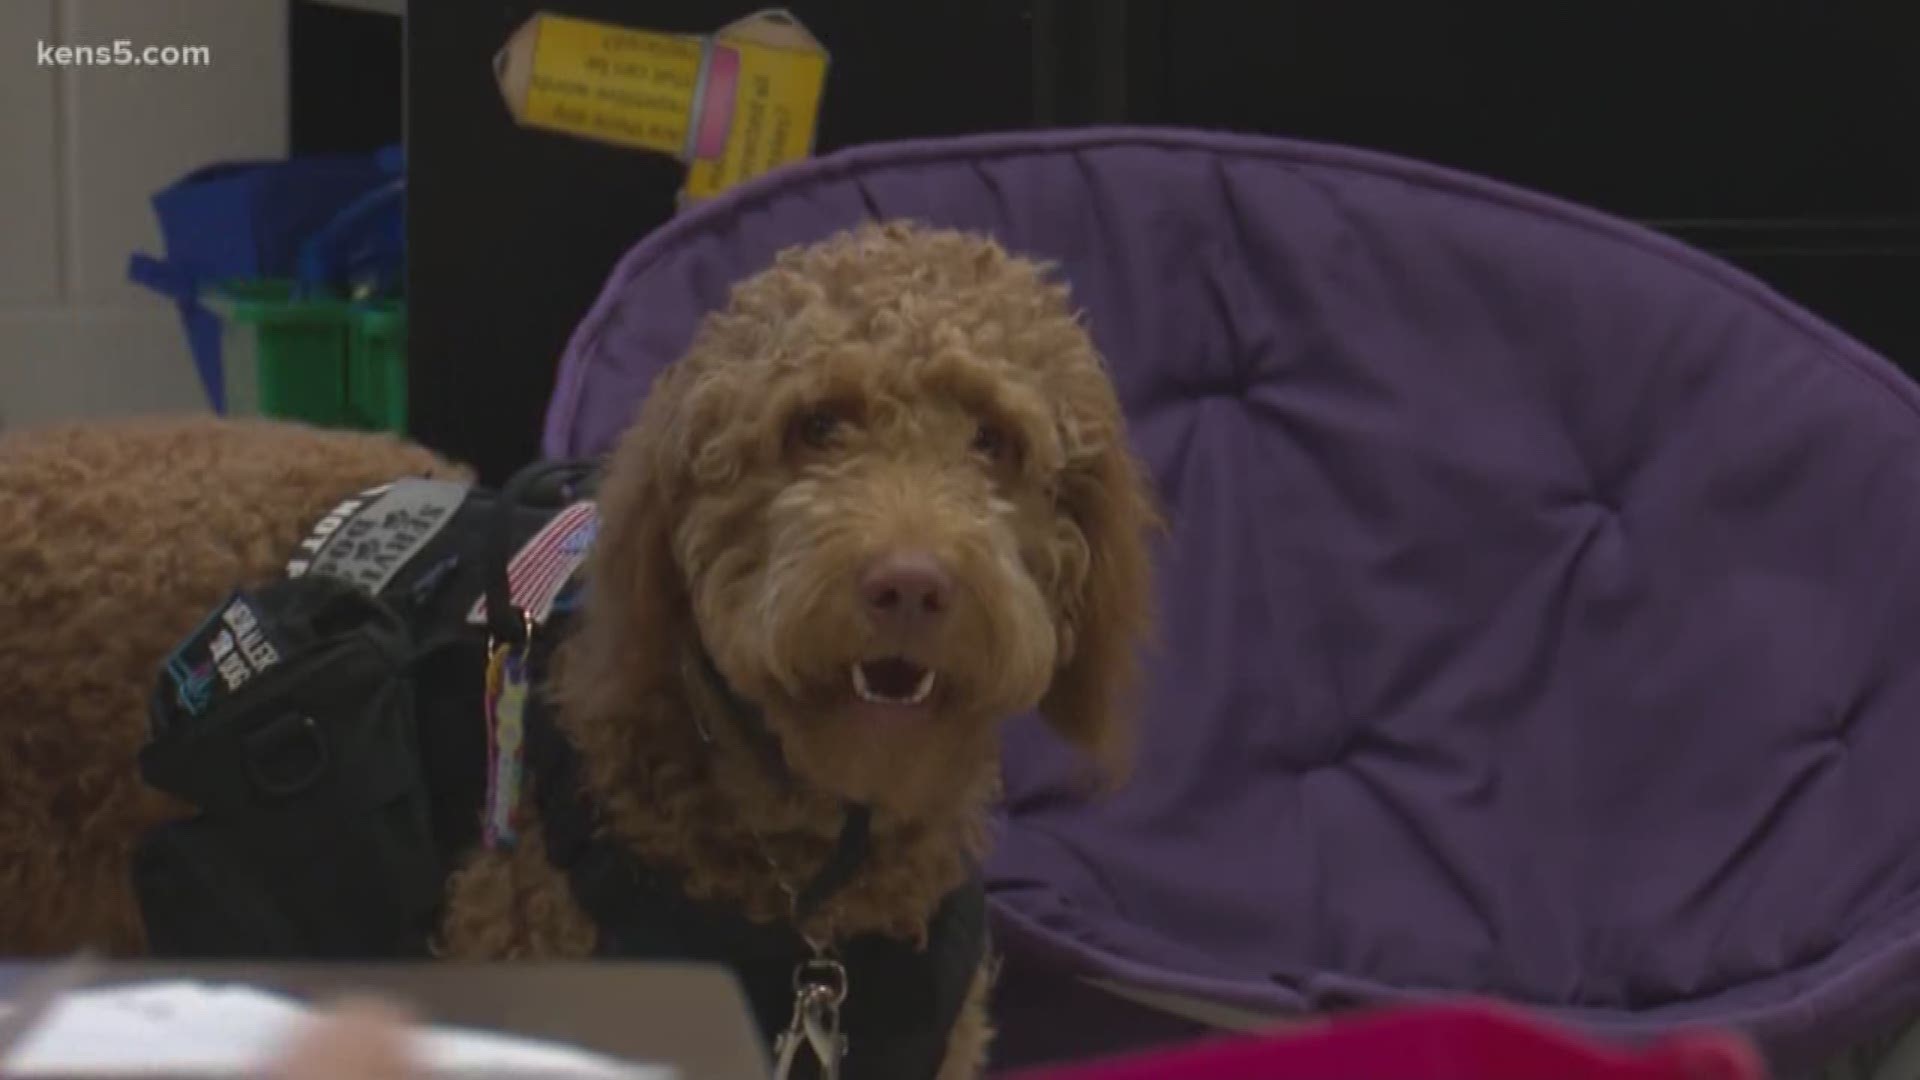 A Northside ISD school now has a four-legged friend walking its halls, a goldendoodle named Charlotte.